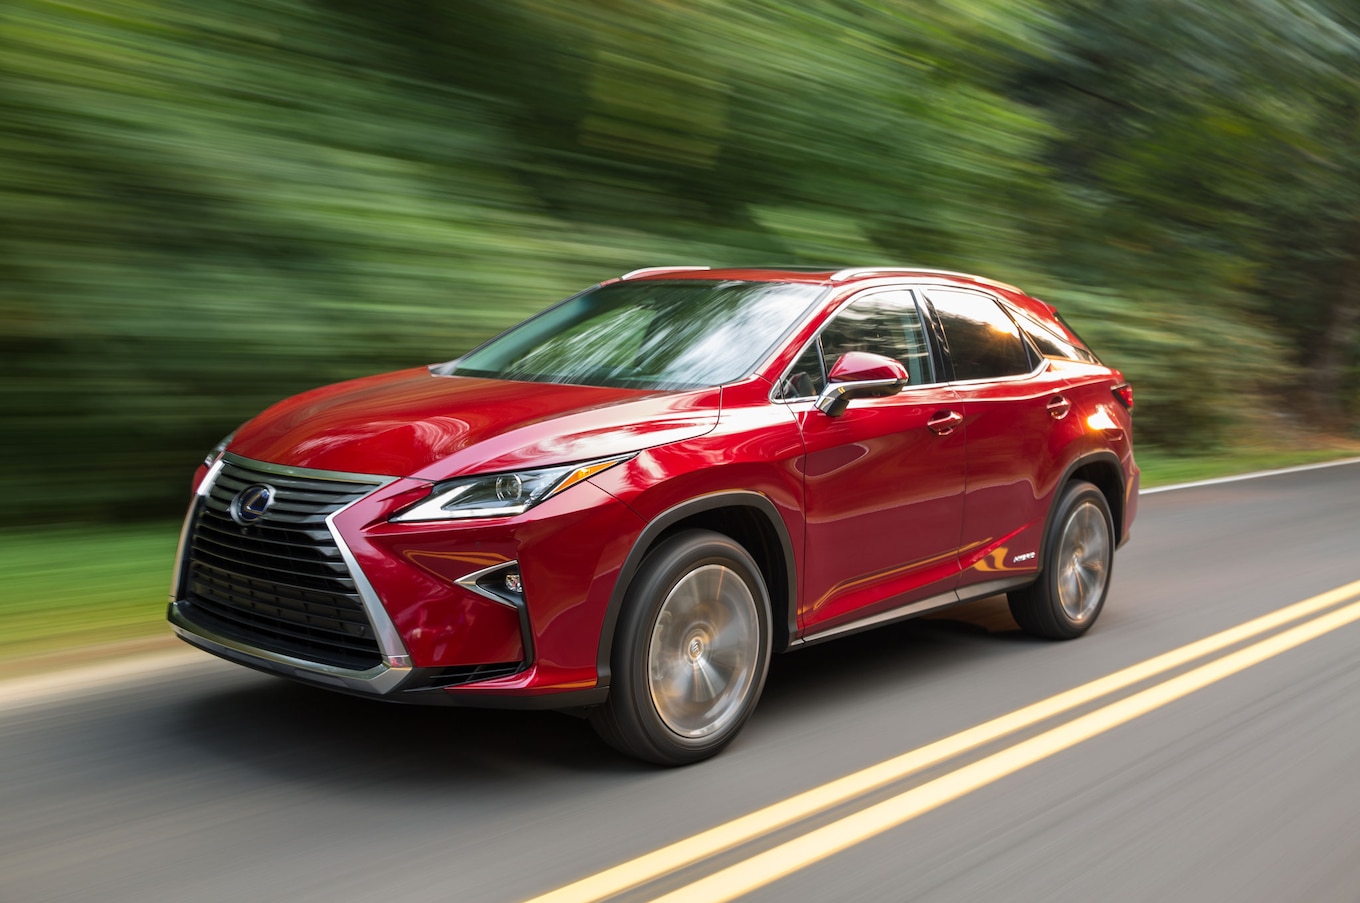 2016 Lexus RX 450h in motion on road